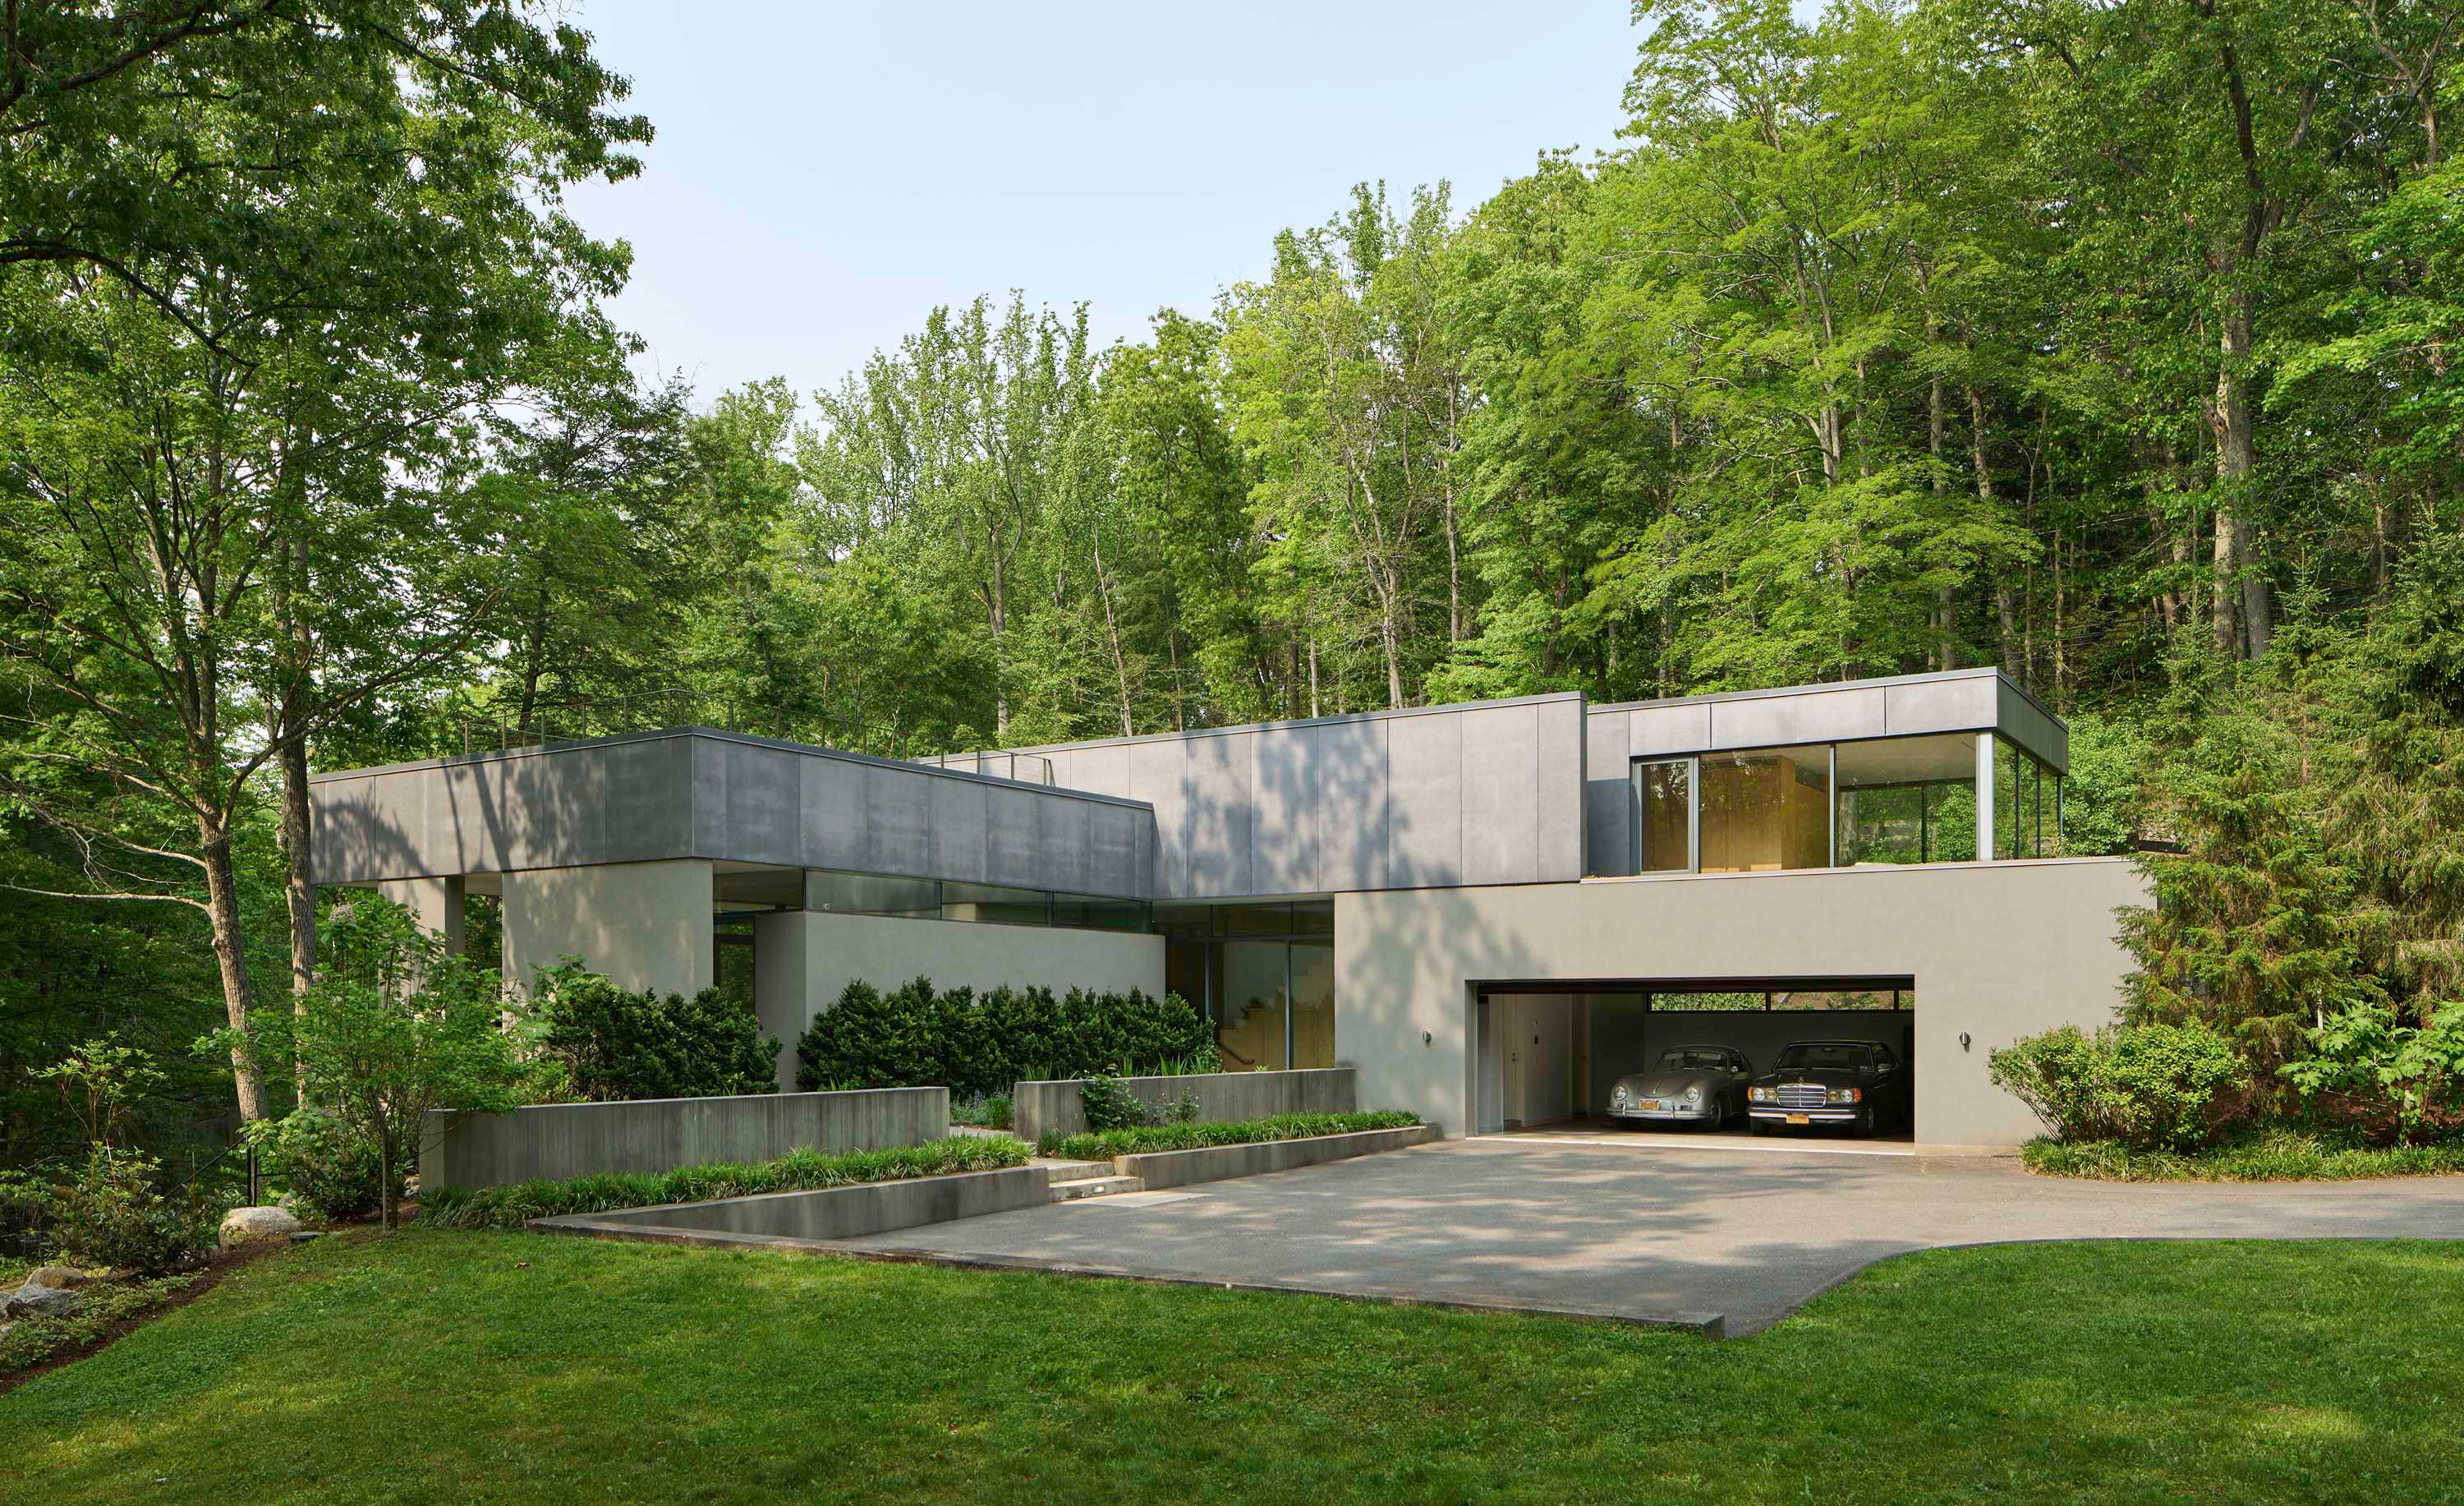 Exterior photo of Weston Residence by Specht Novak Architects. Shot by Jasper Lazor, featuring the concrete and glass home and its parking space.